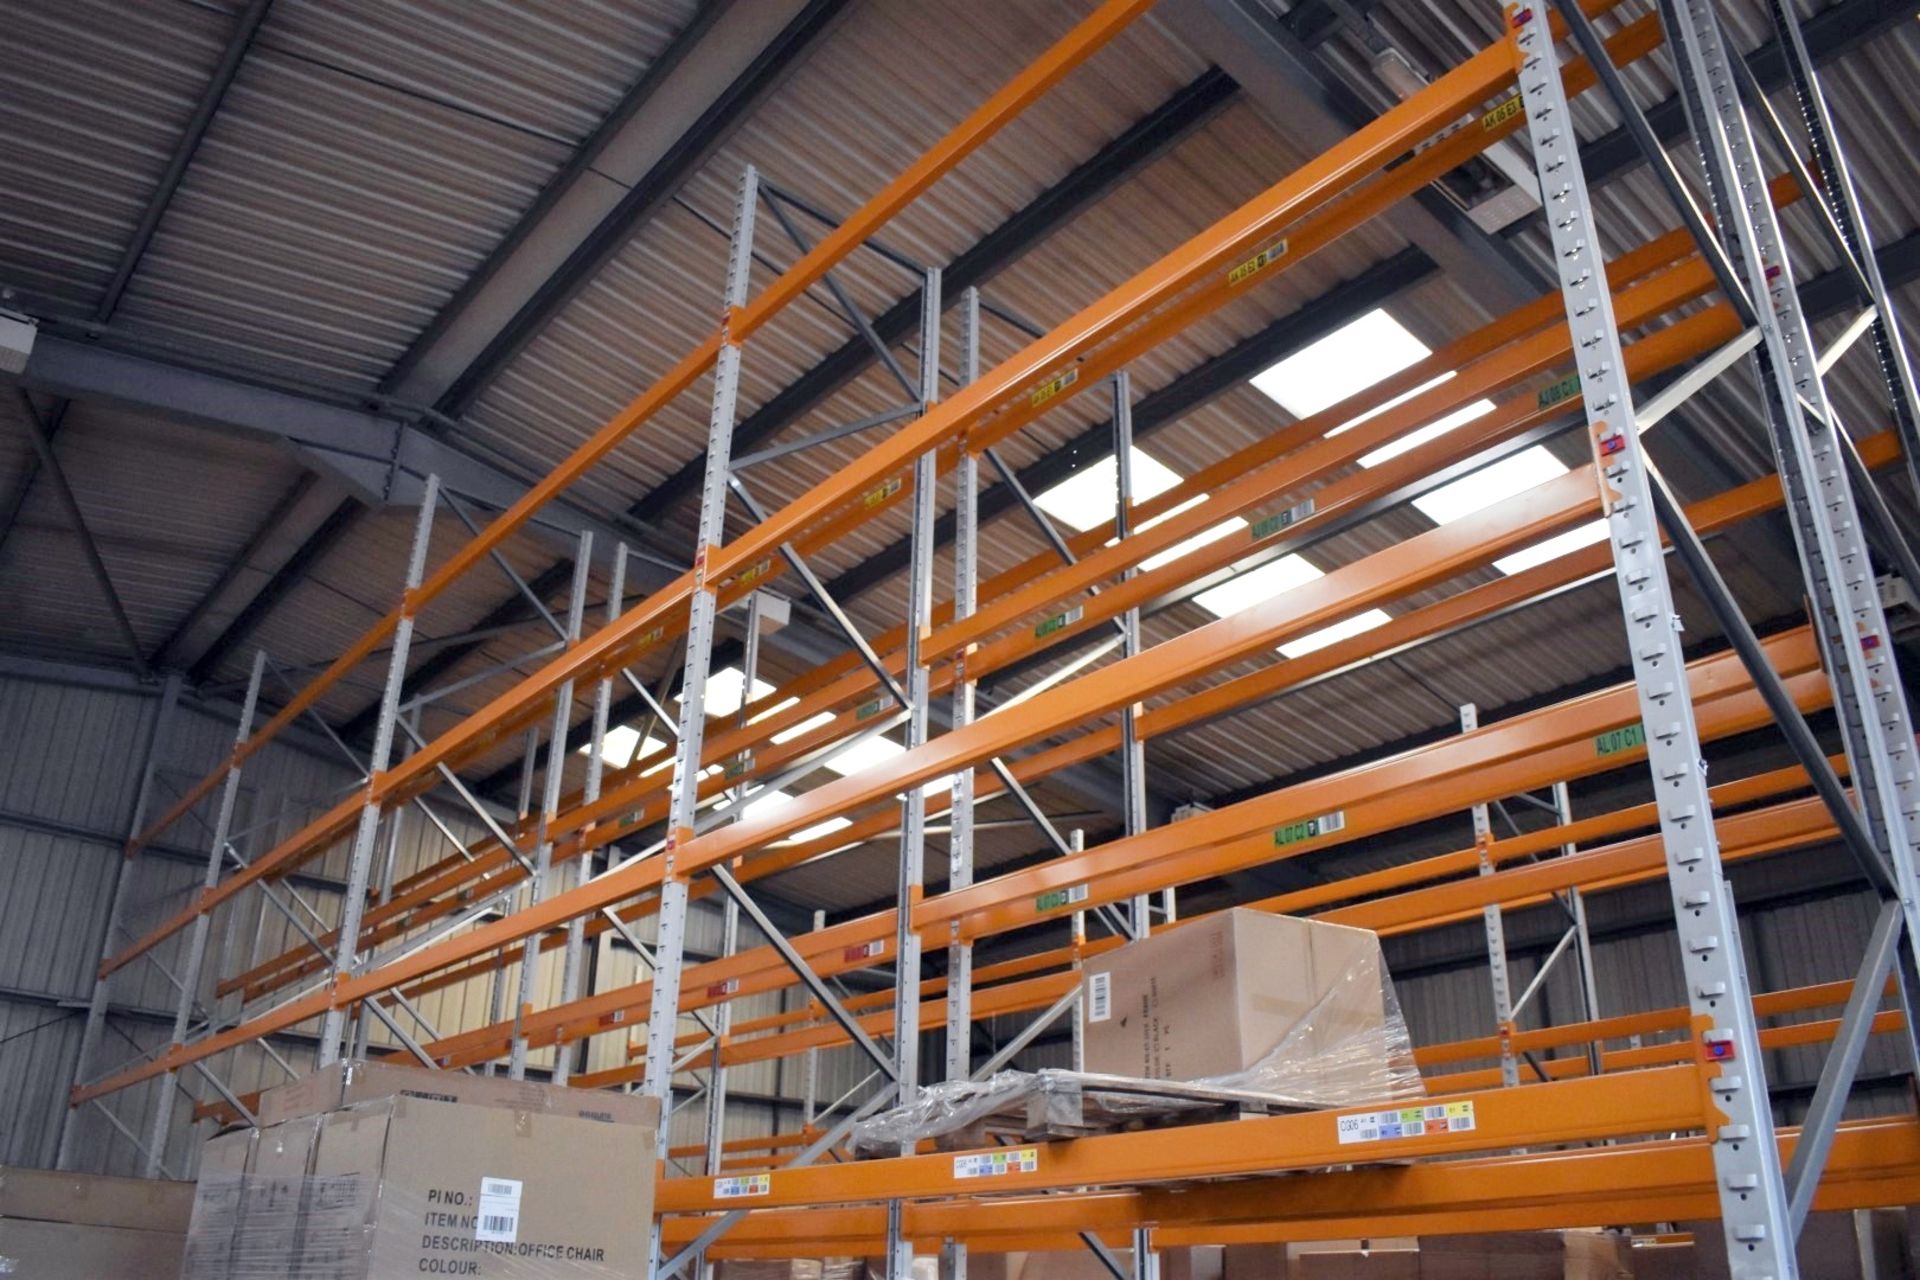 9 x Bays of Apex Pallet Racking - Includes 10 x Apex 16 UK 16,000kg Capacity Uprights and 60 x - Image 12 of 19